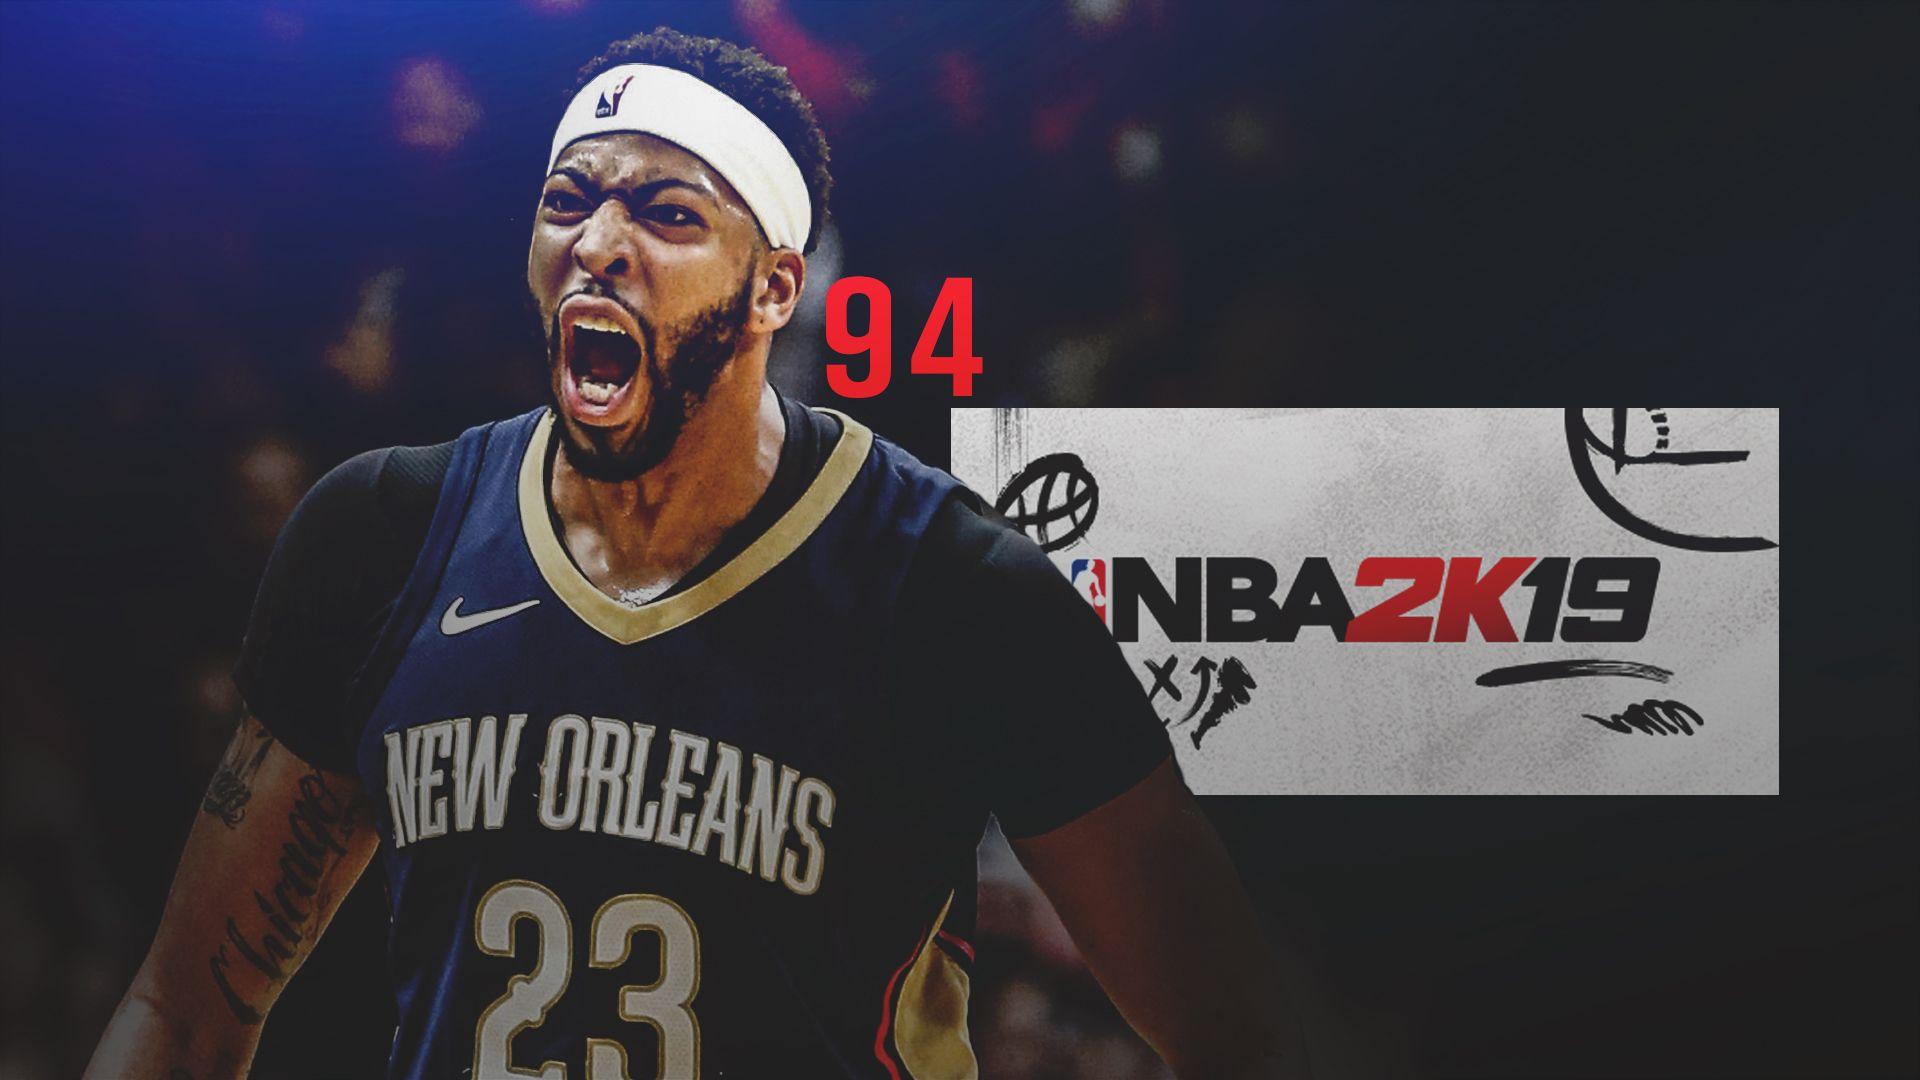 Pelicans news: Anthony Davis rated 94 in NBA 2K19